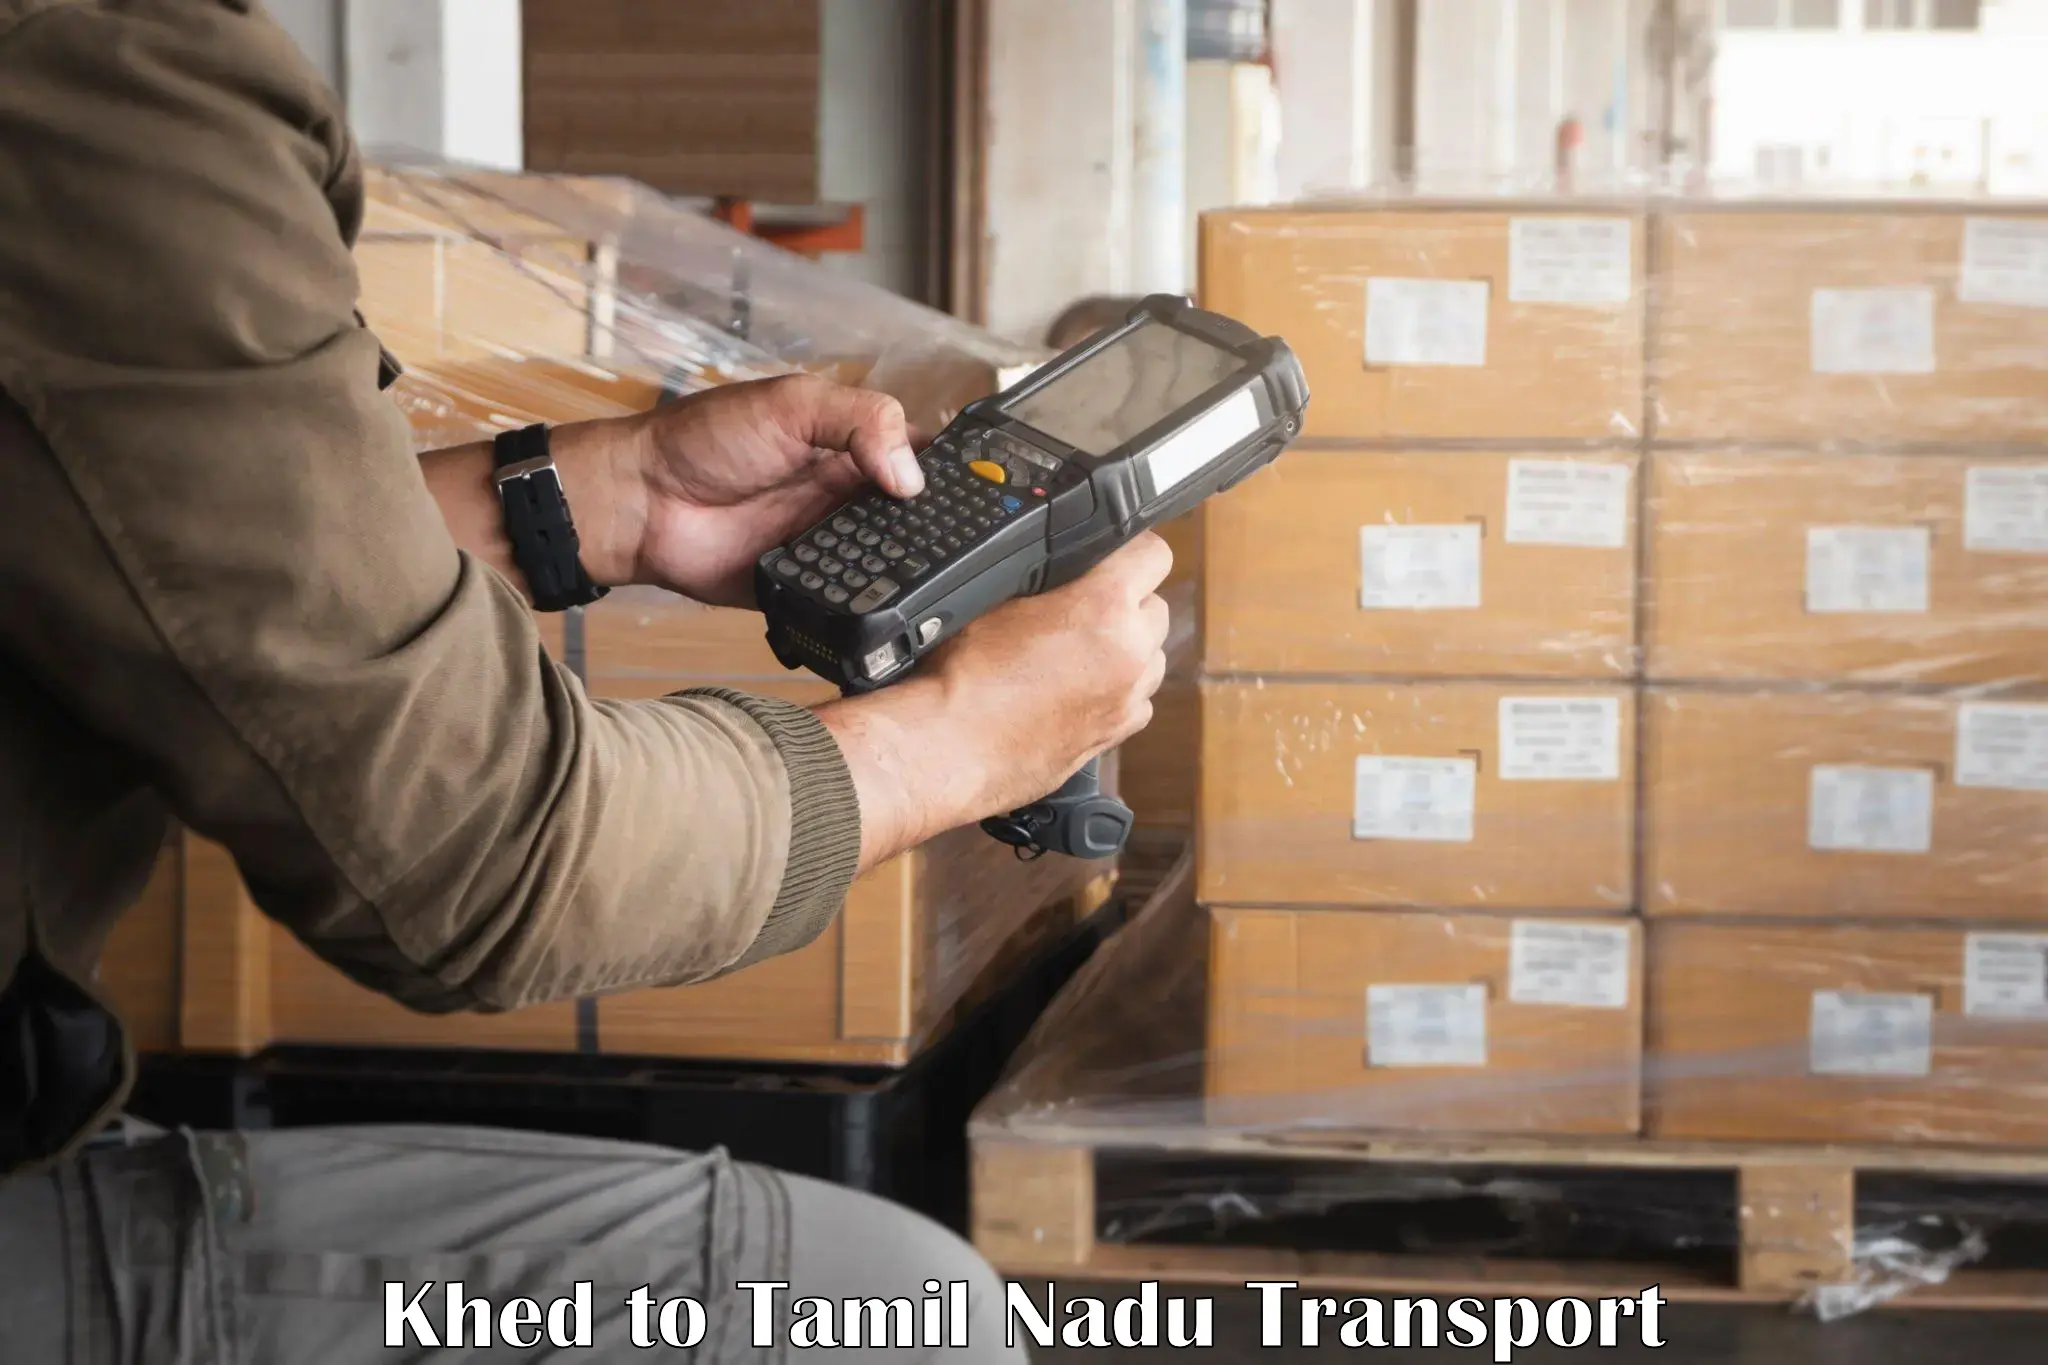 Truck transport companies in India Khed to Tamil Nadu